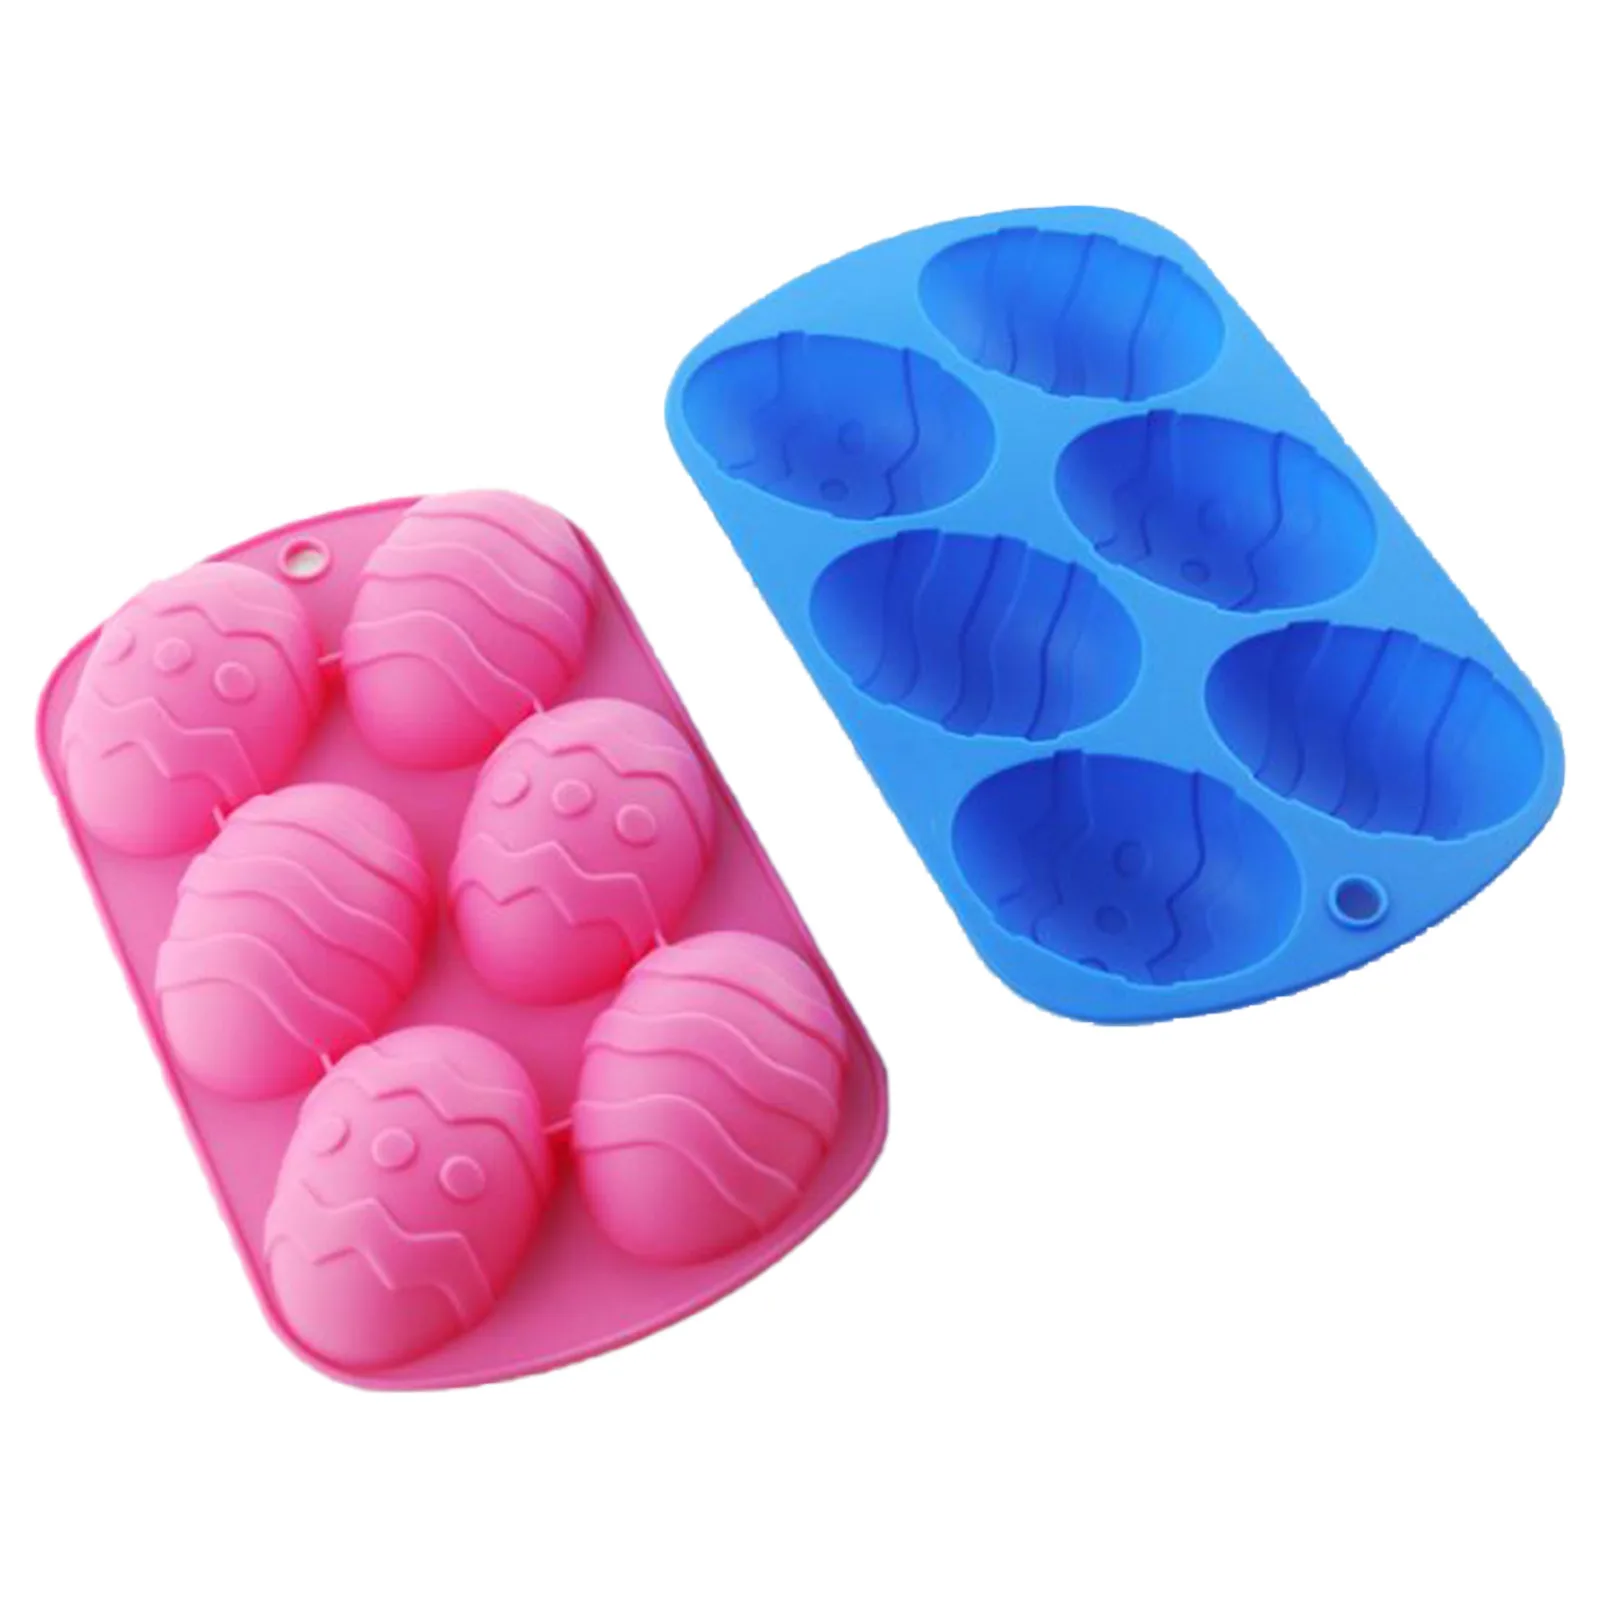 

Silicone Muffin Chocolate Cookie Baking Mould Pan Ice Maker Mould Cake Mold 3D DIY Holiday Eggs Shaped 6pcs 6 Cavity Easter Egg